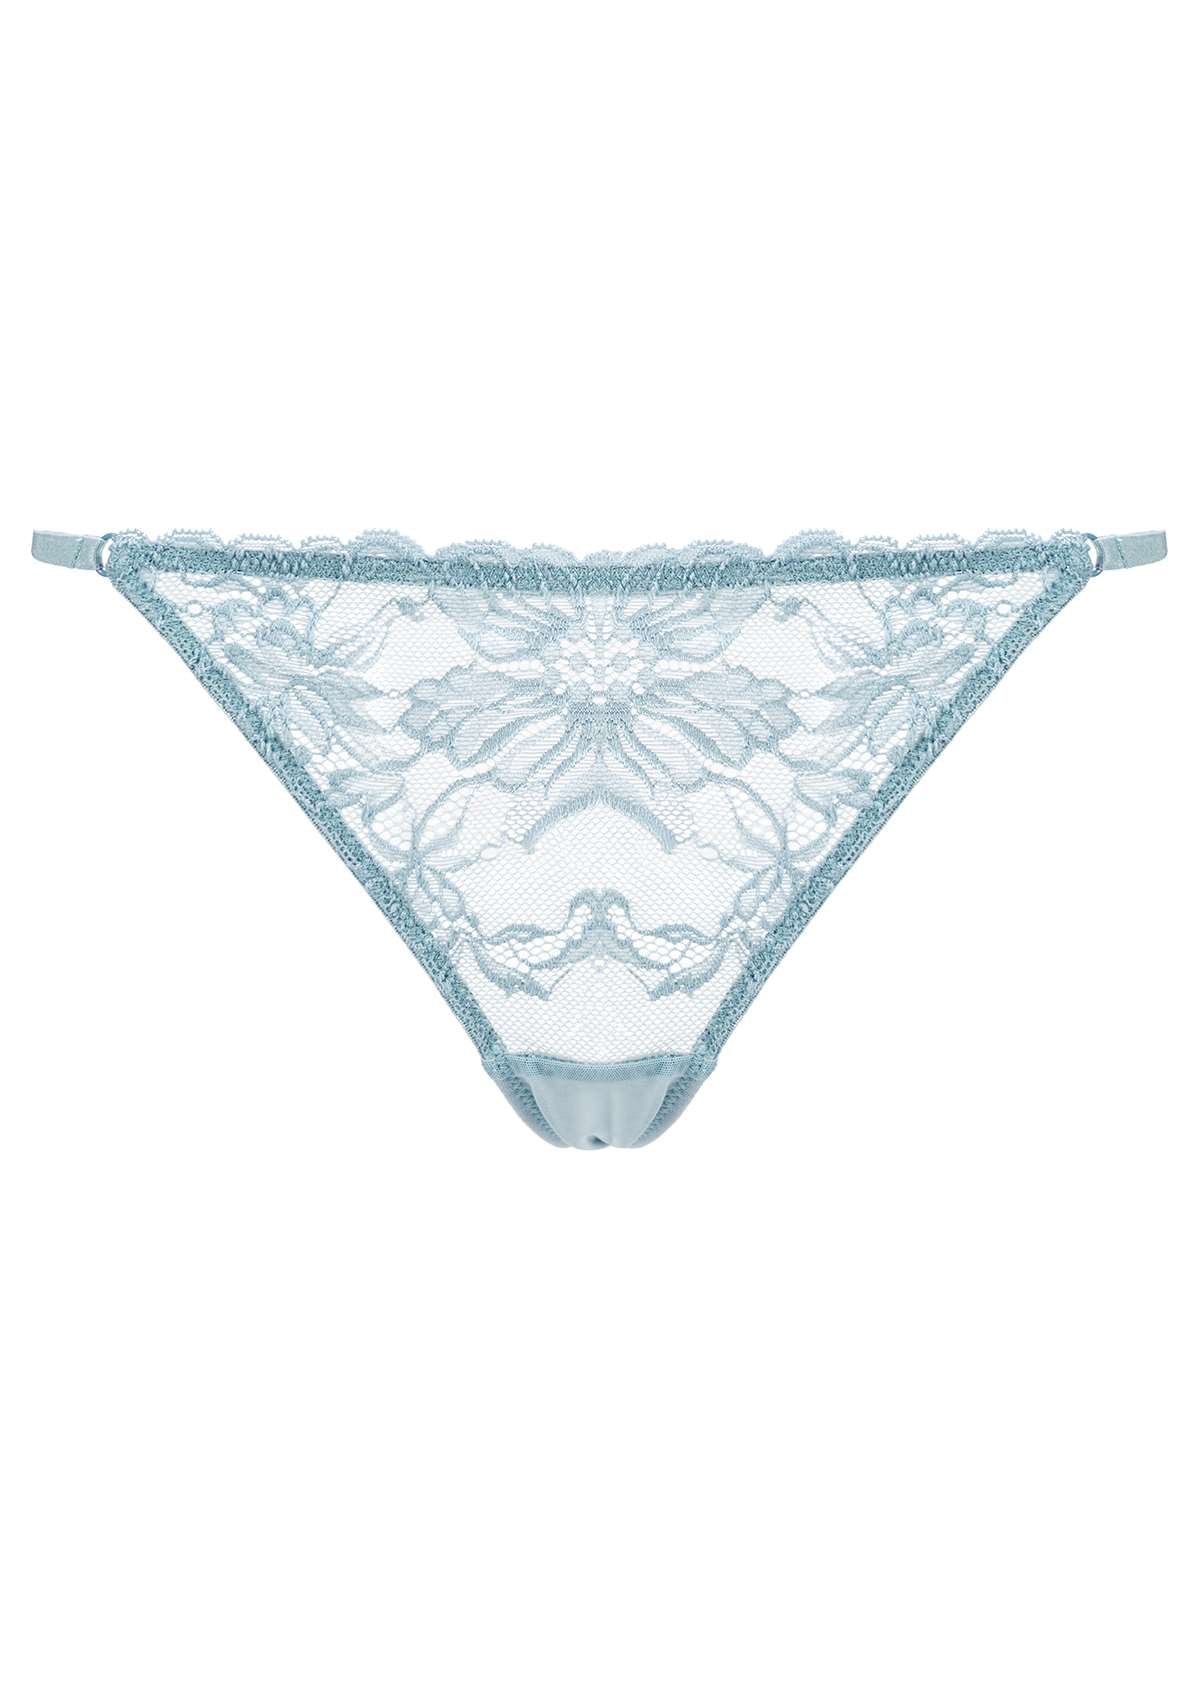 HSIA Pretty In Petals: 3-Pack Of Sexy Floral Chic Lace String Thongs - M / Light Coral+Dusty Peach+Pewter Blue